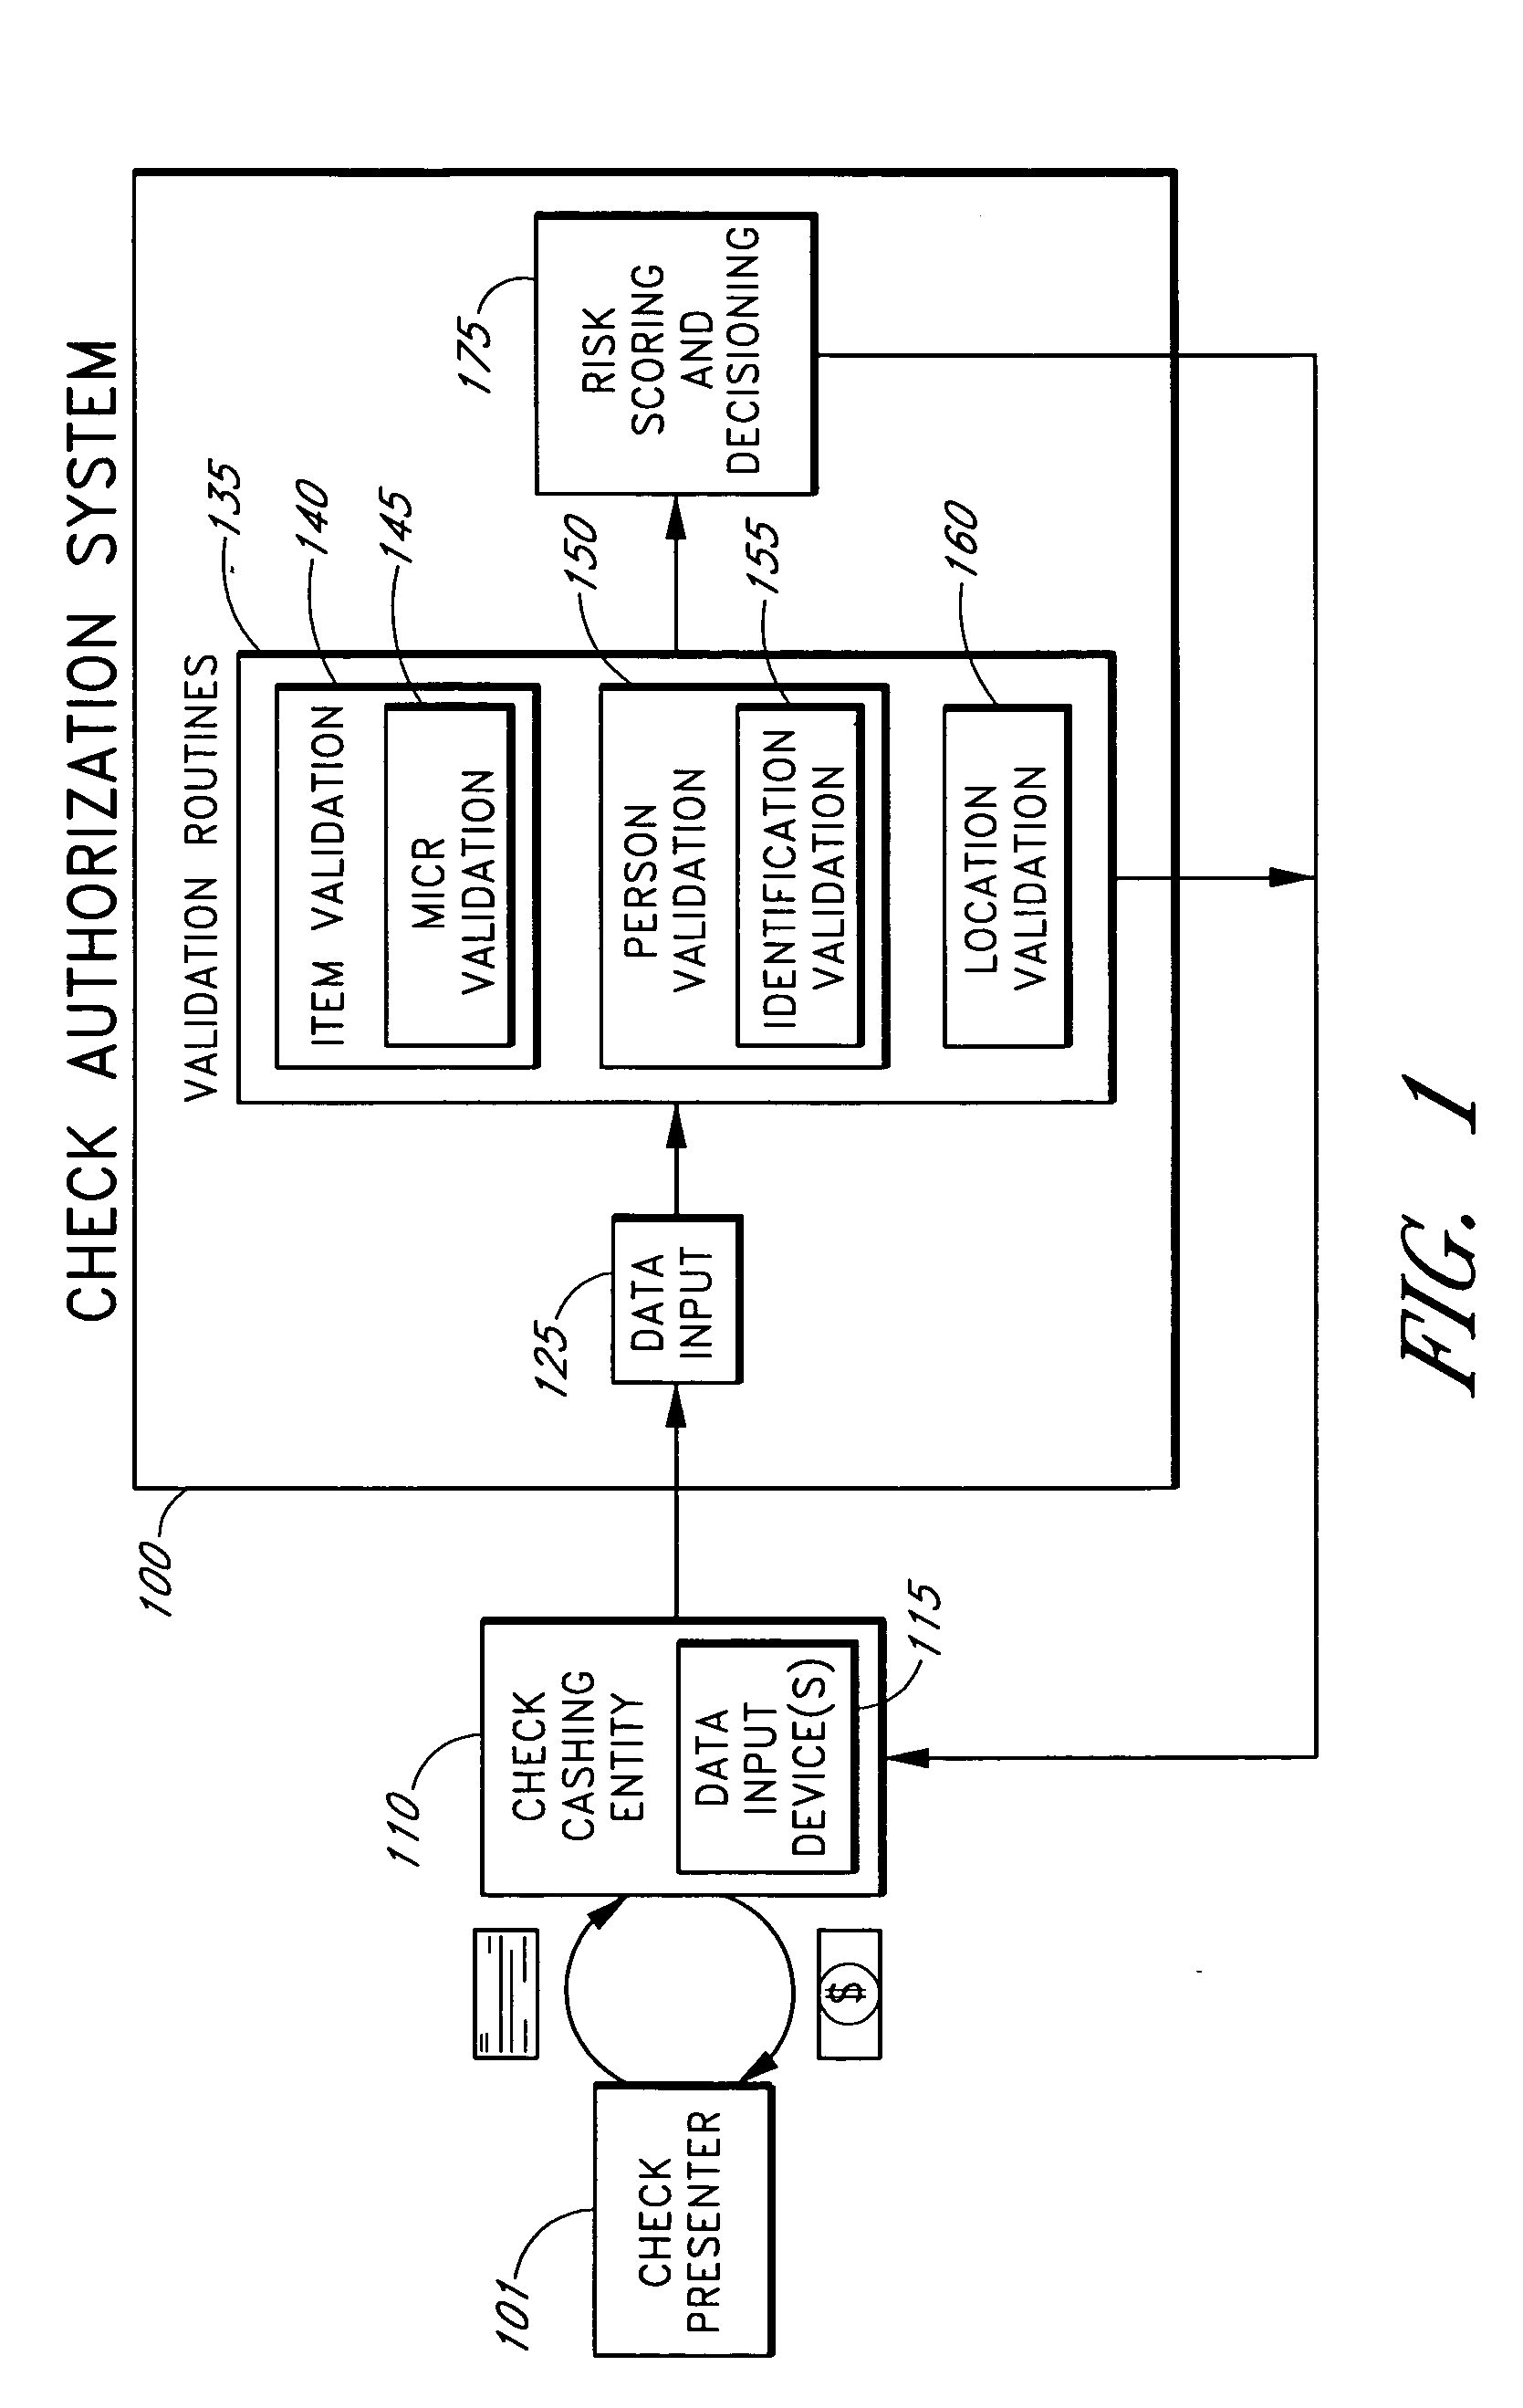 Systems and methods for obtaining authentication marks at a point of sale